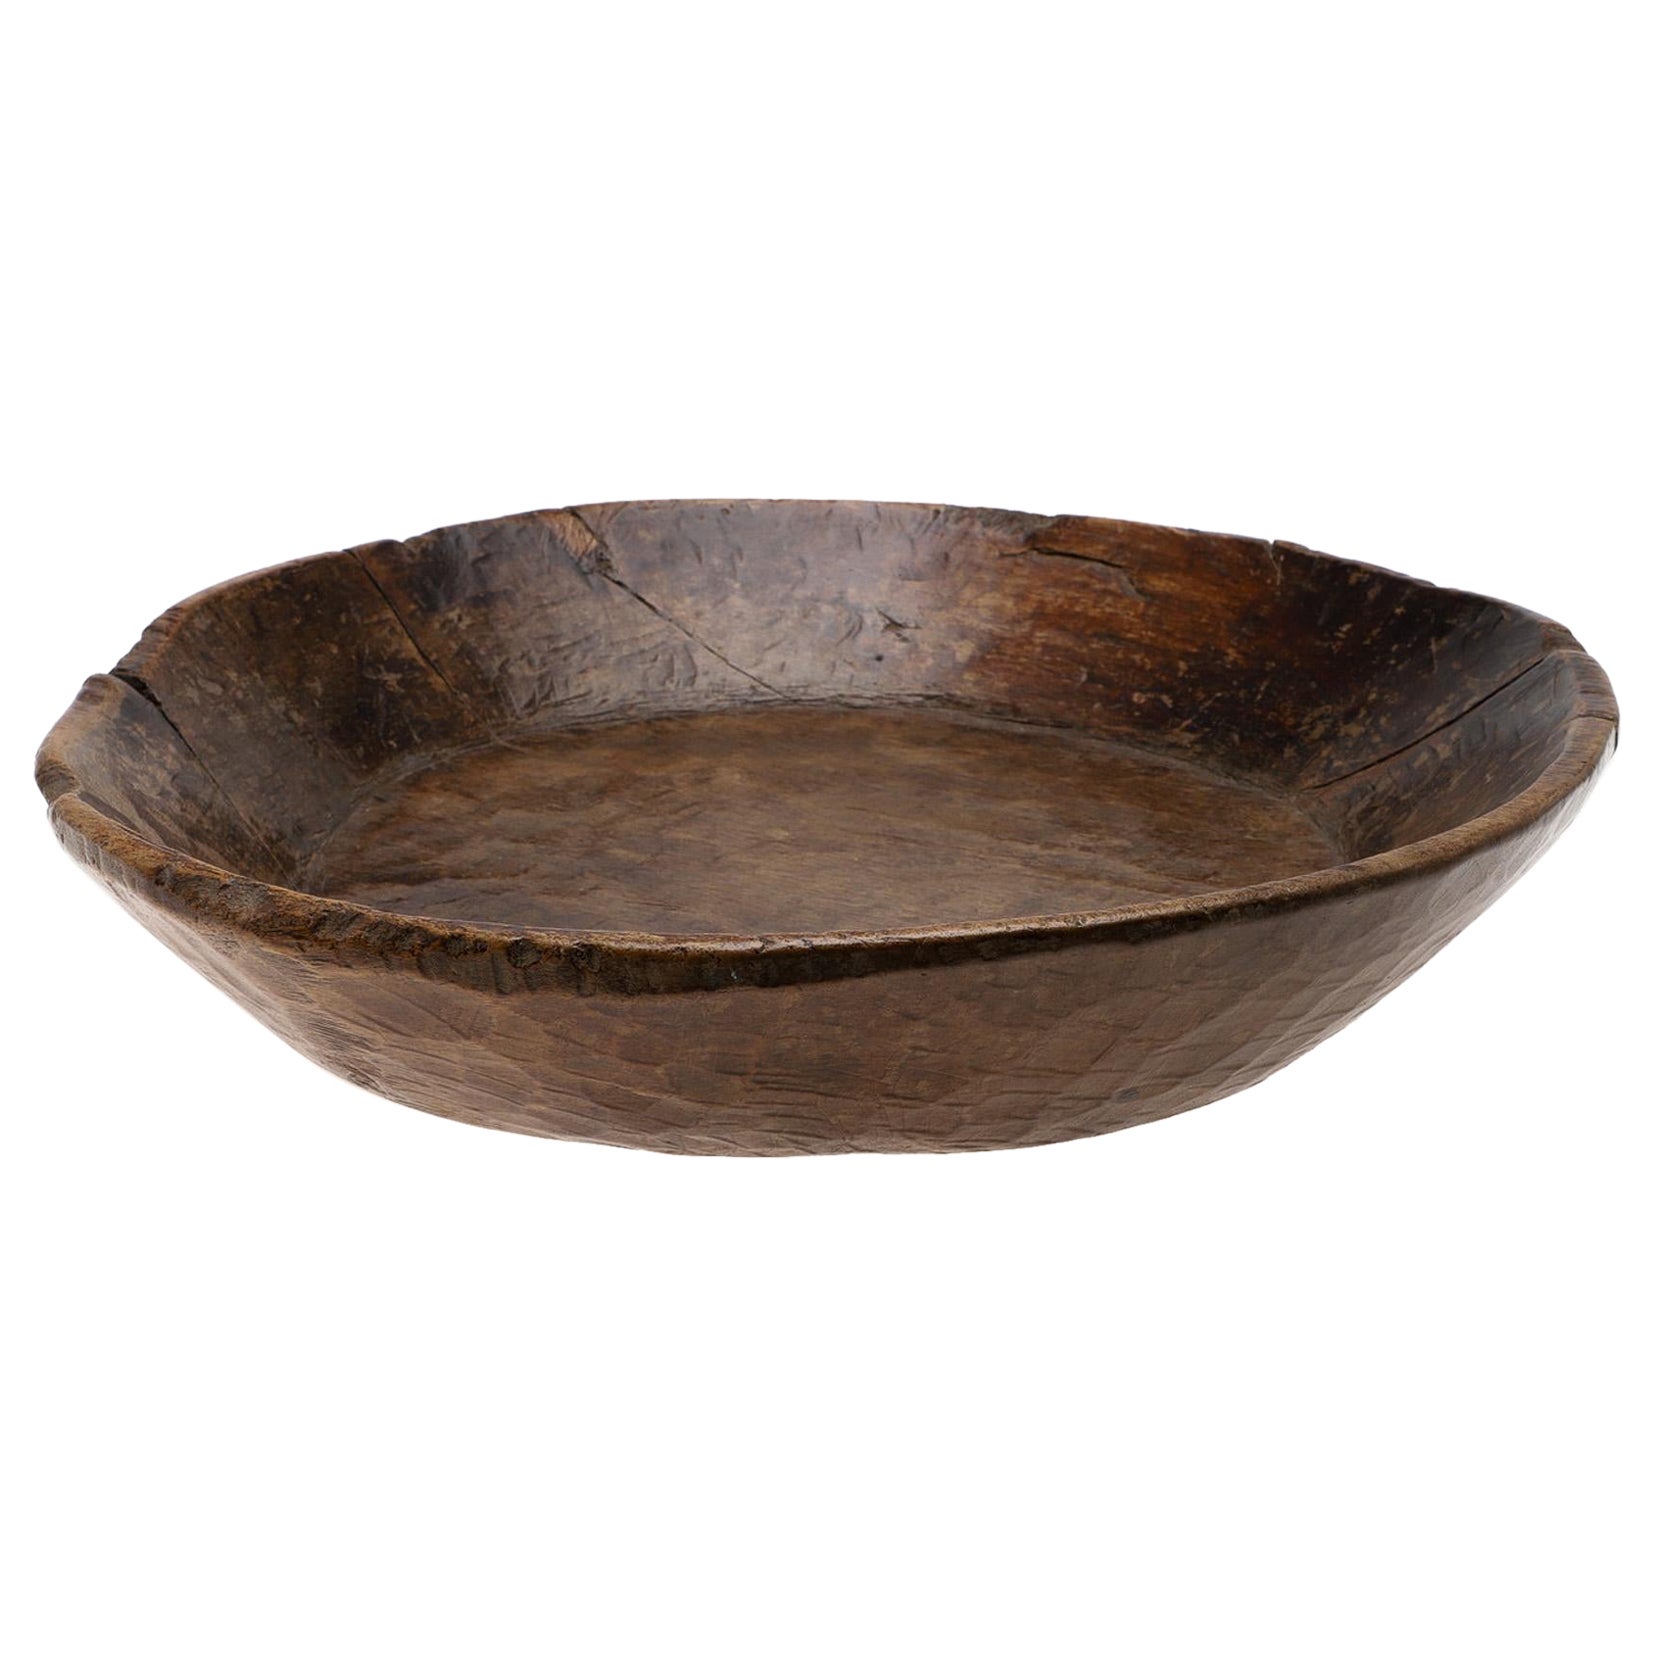 French Antique Dark Brown Wooden Bowl Tray in Oak Produced in France Early 1800s For Sale